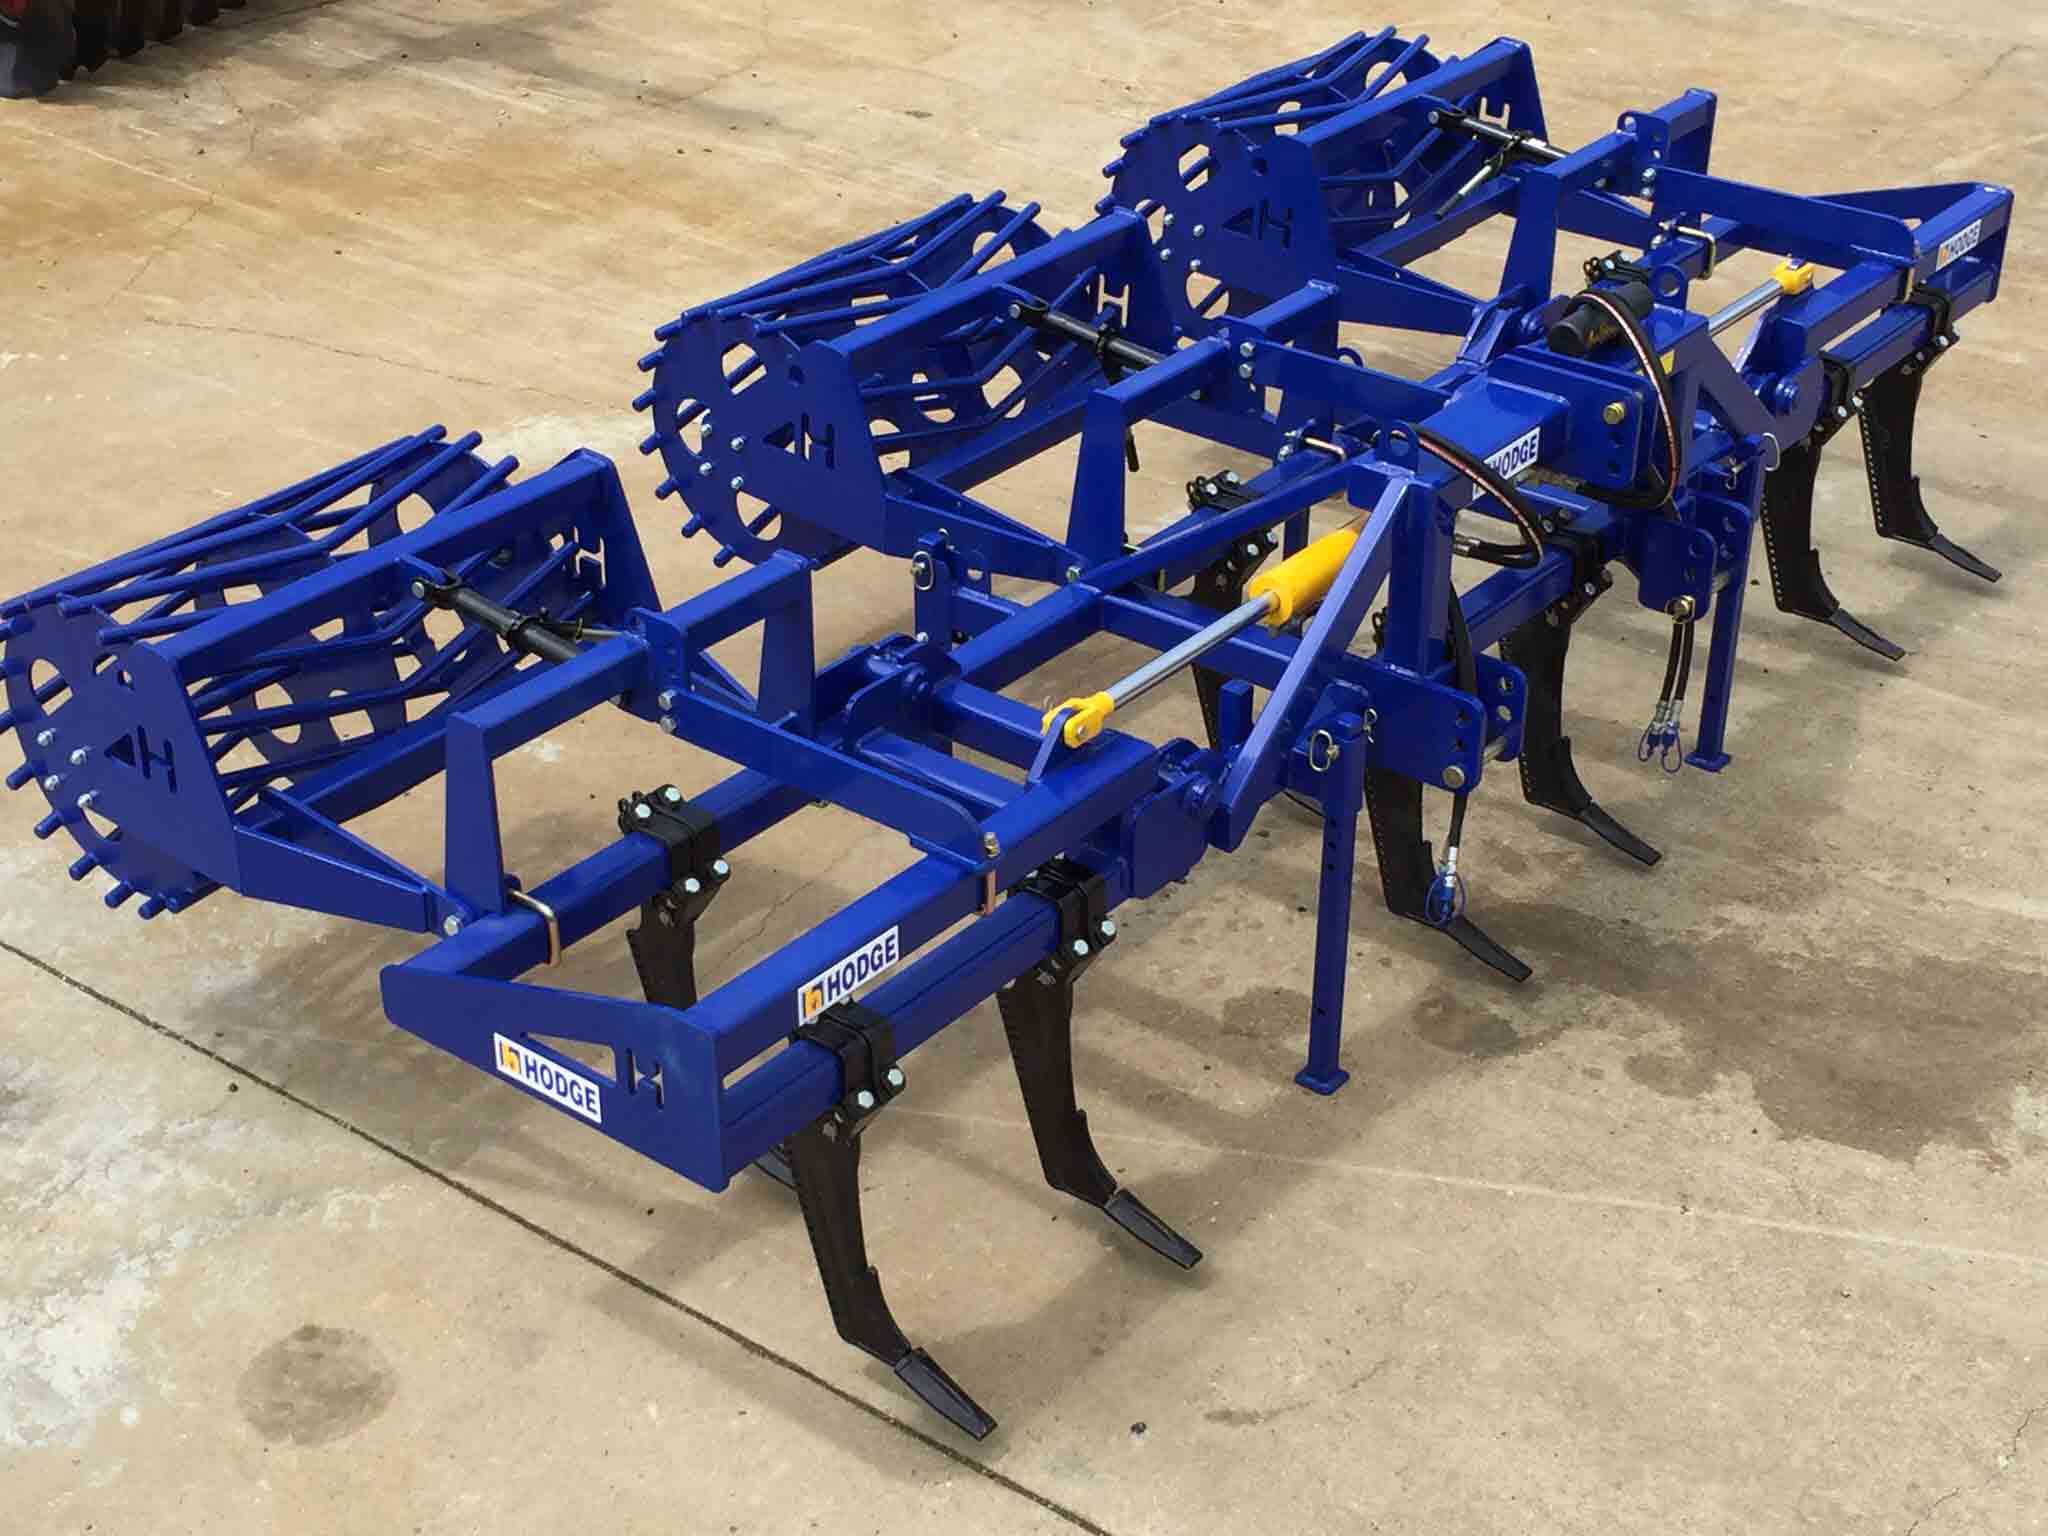 Bed-Ripper-Folding-3row--012830 — Hodge Industries in Mackay Harbour, QLD